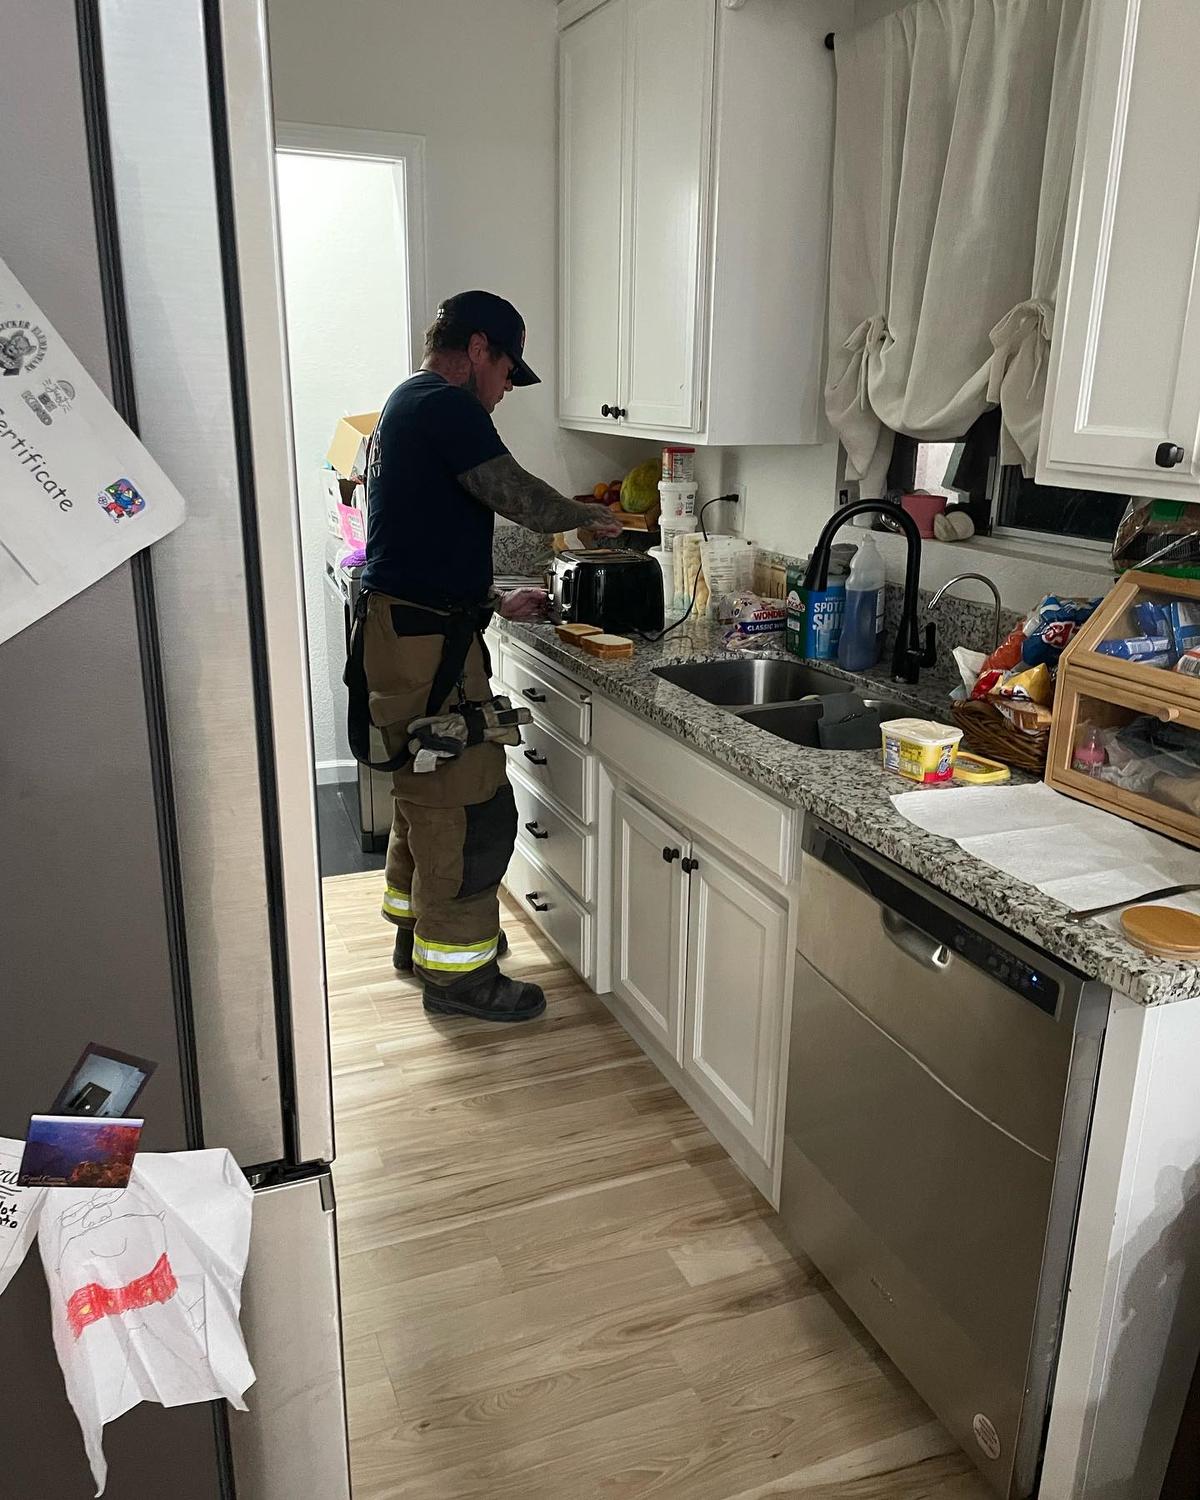 LBFD Capt. Thompson helped make breakfast for the three children whose mother was taken to the hospital. (Courtesy of Los Banos Fire Department)